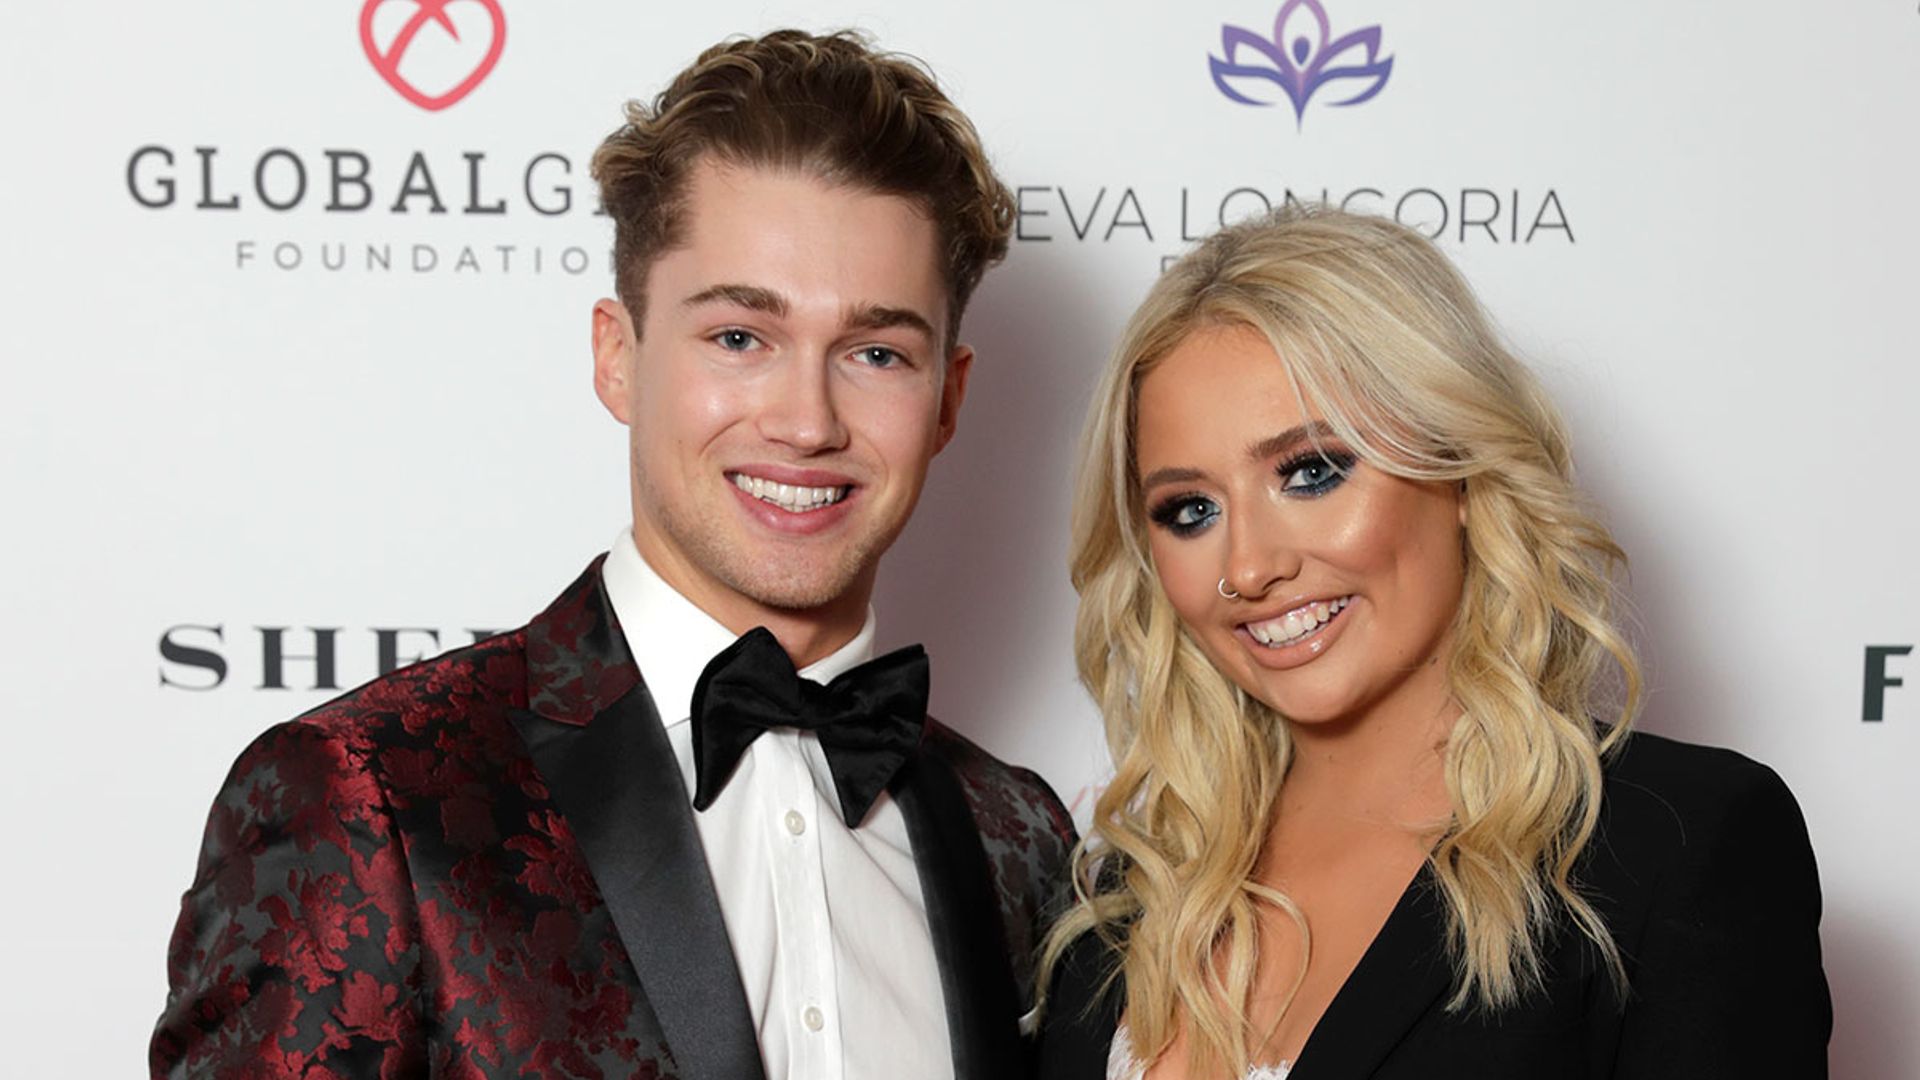 Strictly's AJ Pritchard and Saffron Barker reveal how they've formed such a close bond